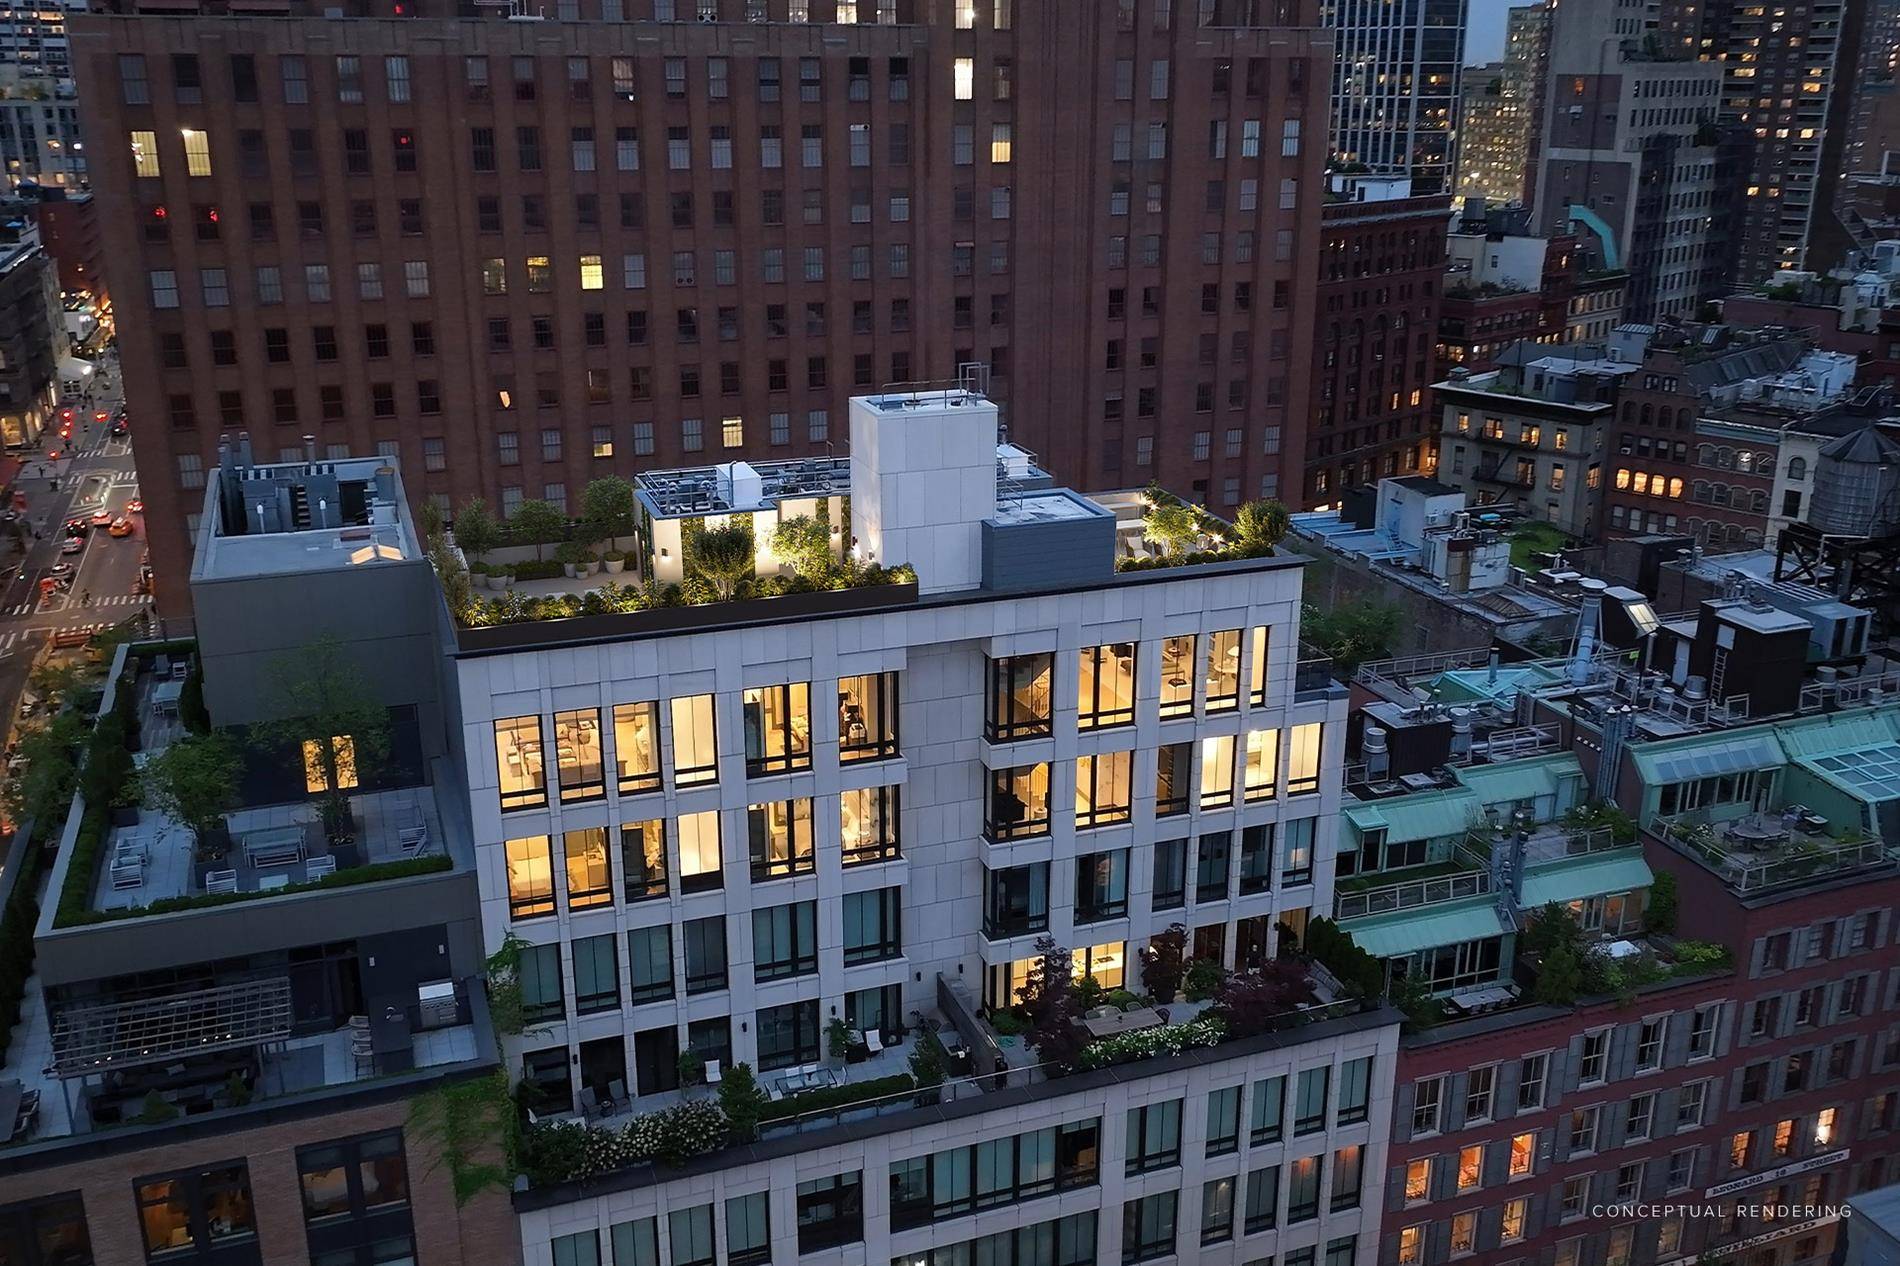 24 Leonard Street PH9 presents a luxurious 100 wide triplex penthouse in the heart of Tribeca.